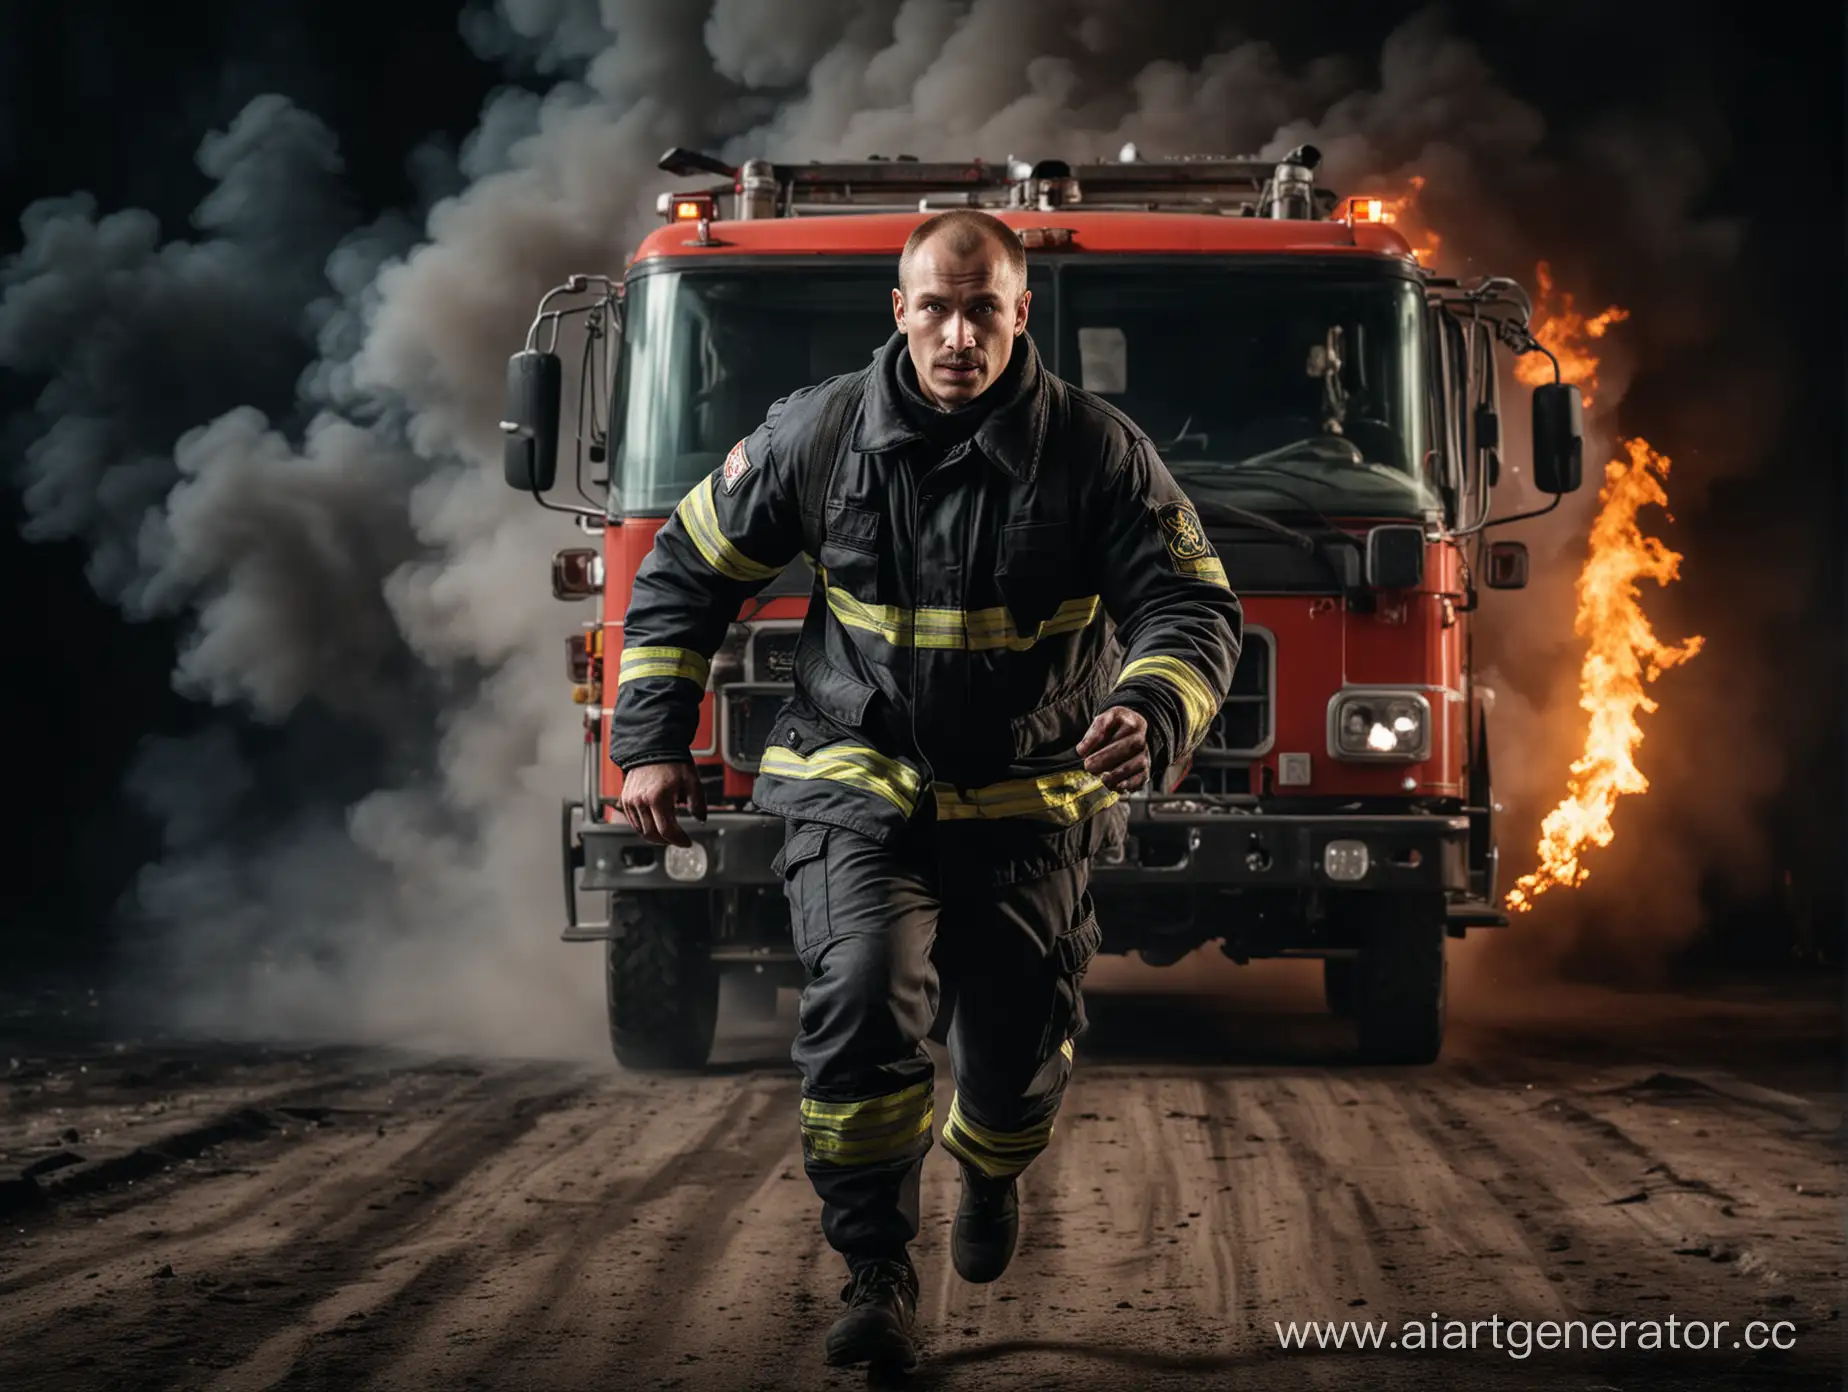 Energetic-Russian-Fireman-Running-in-Front-of-Fire-Truck-at-Night